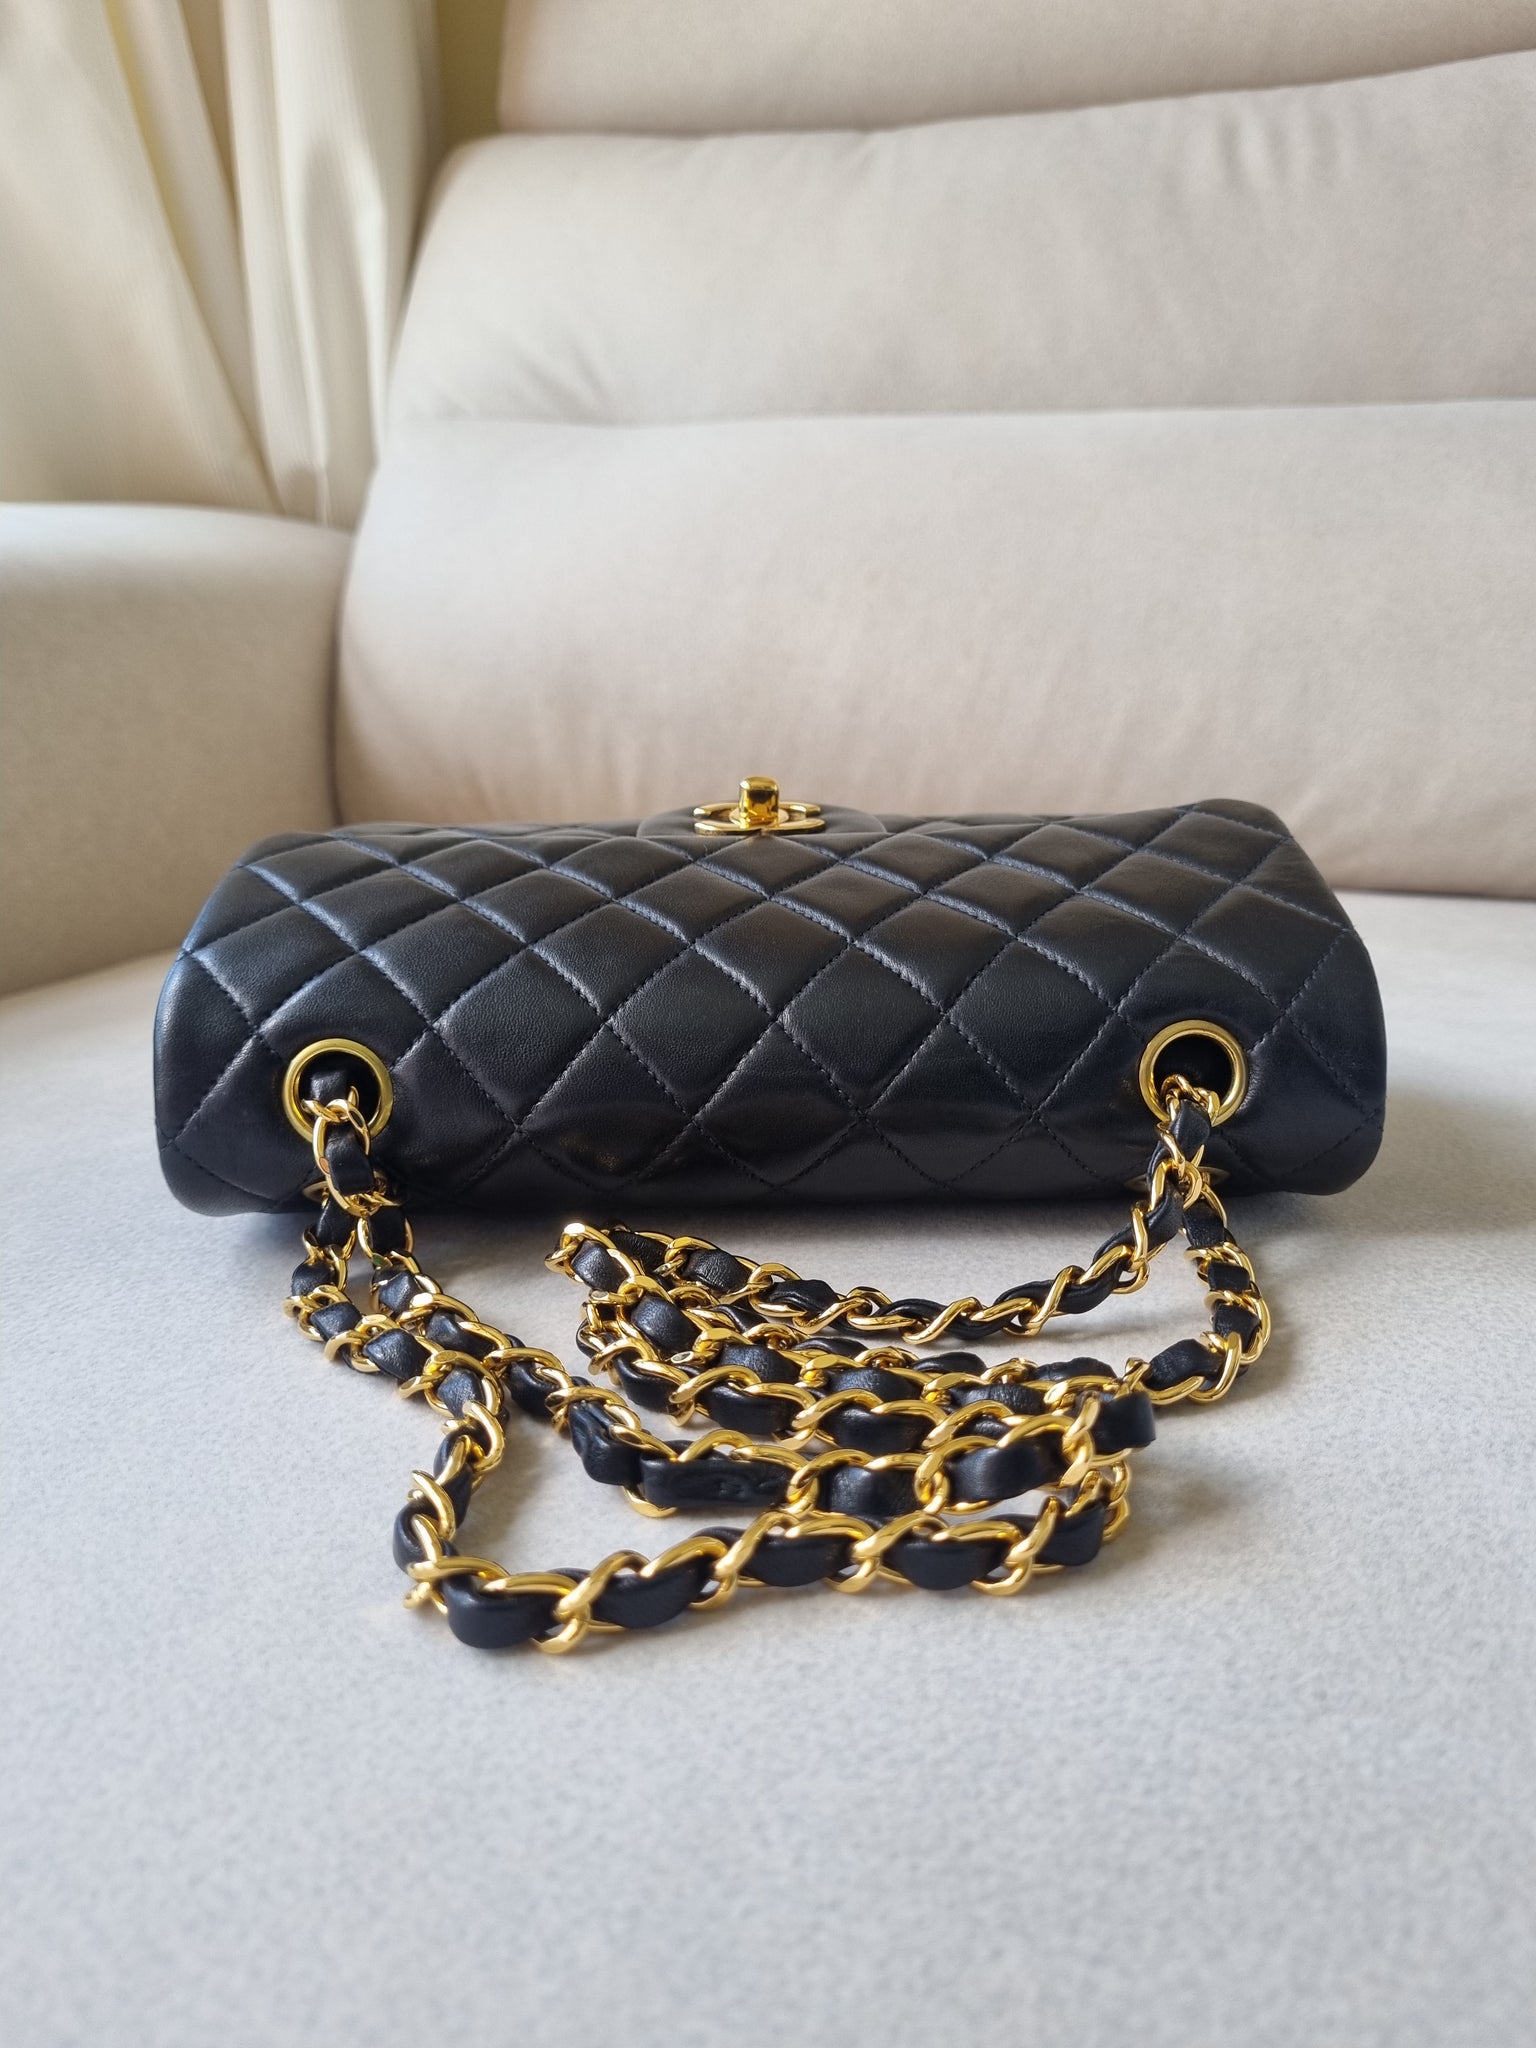 Chanel Small Classic Flap Black Lambskin 24k Gold – CamelliaCurate